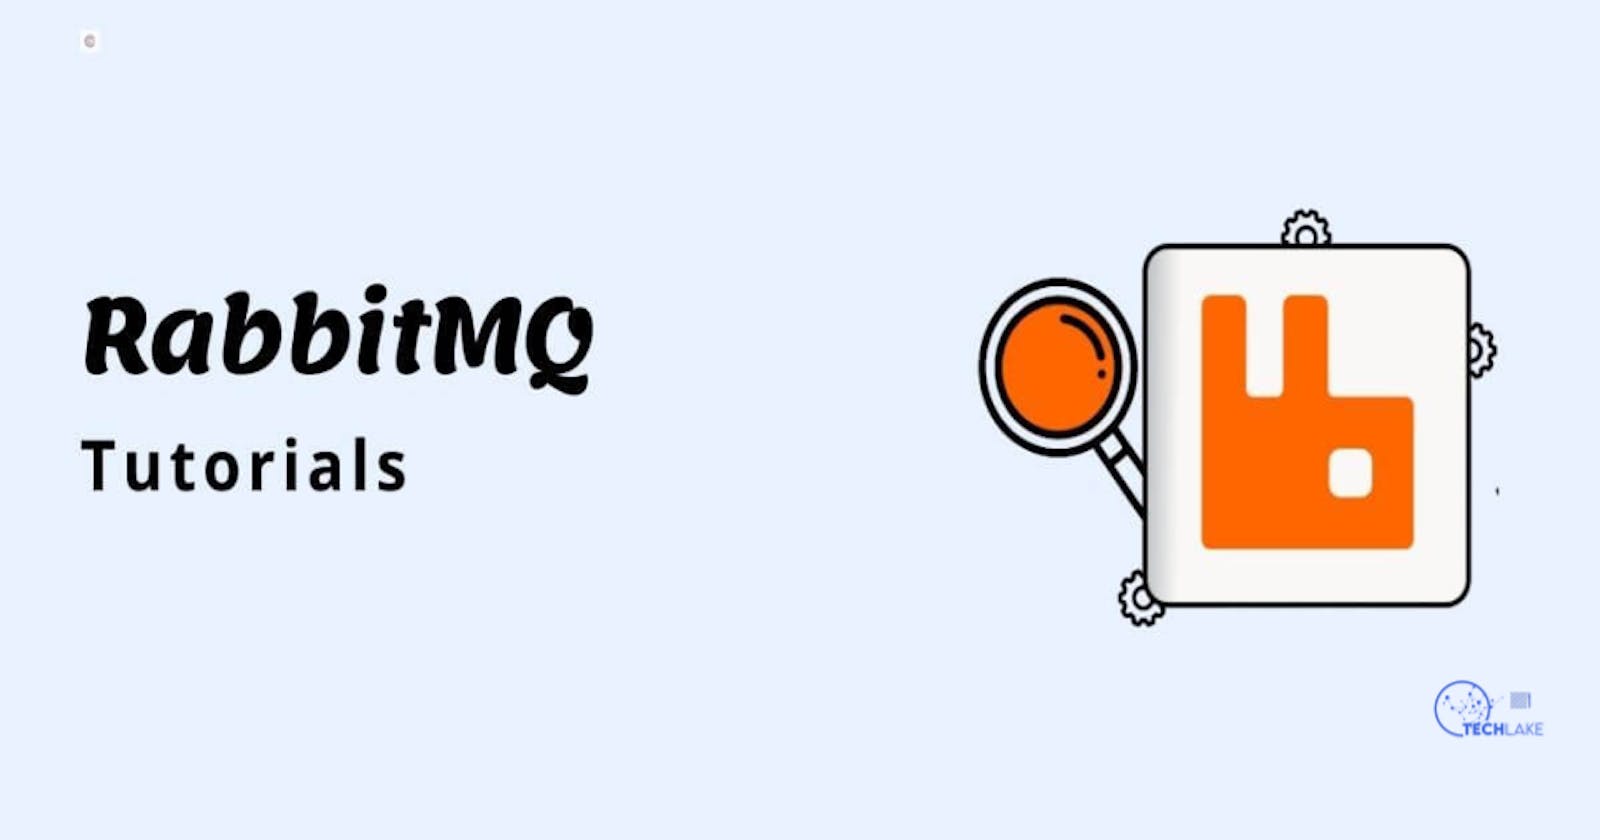 Tutorial: How to set up RabbitMQ